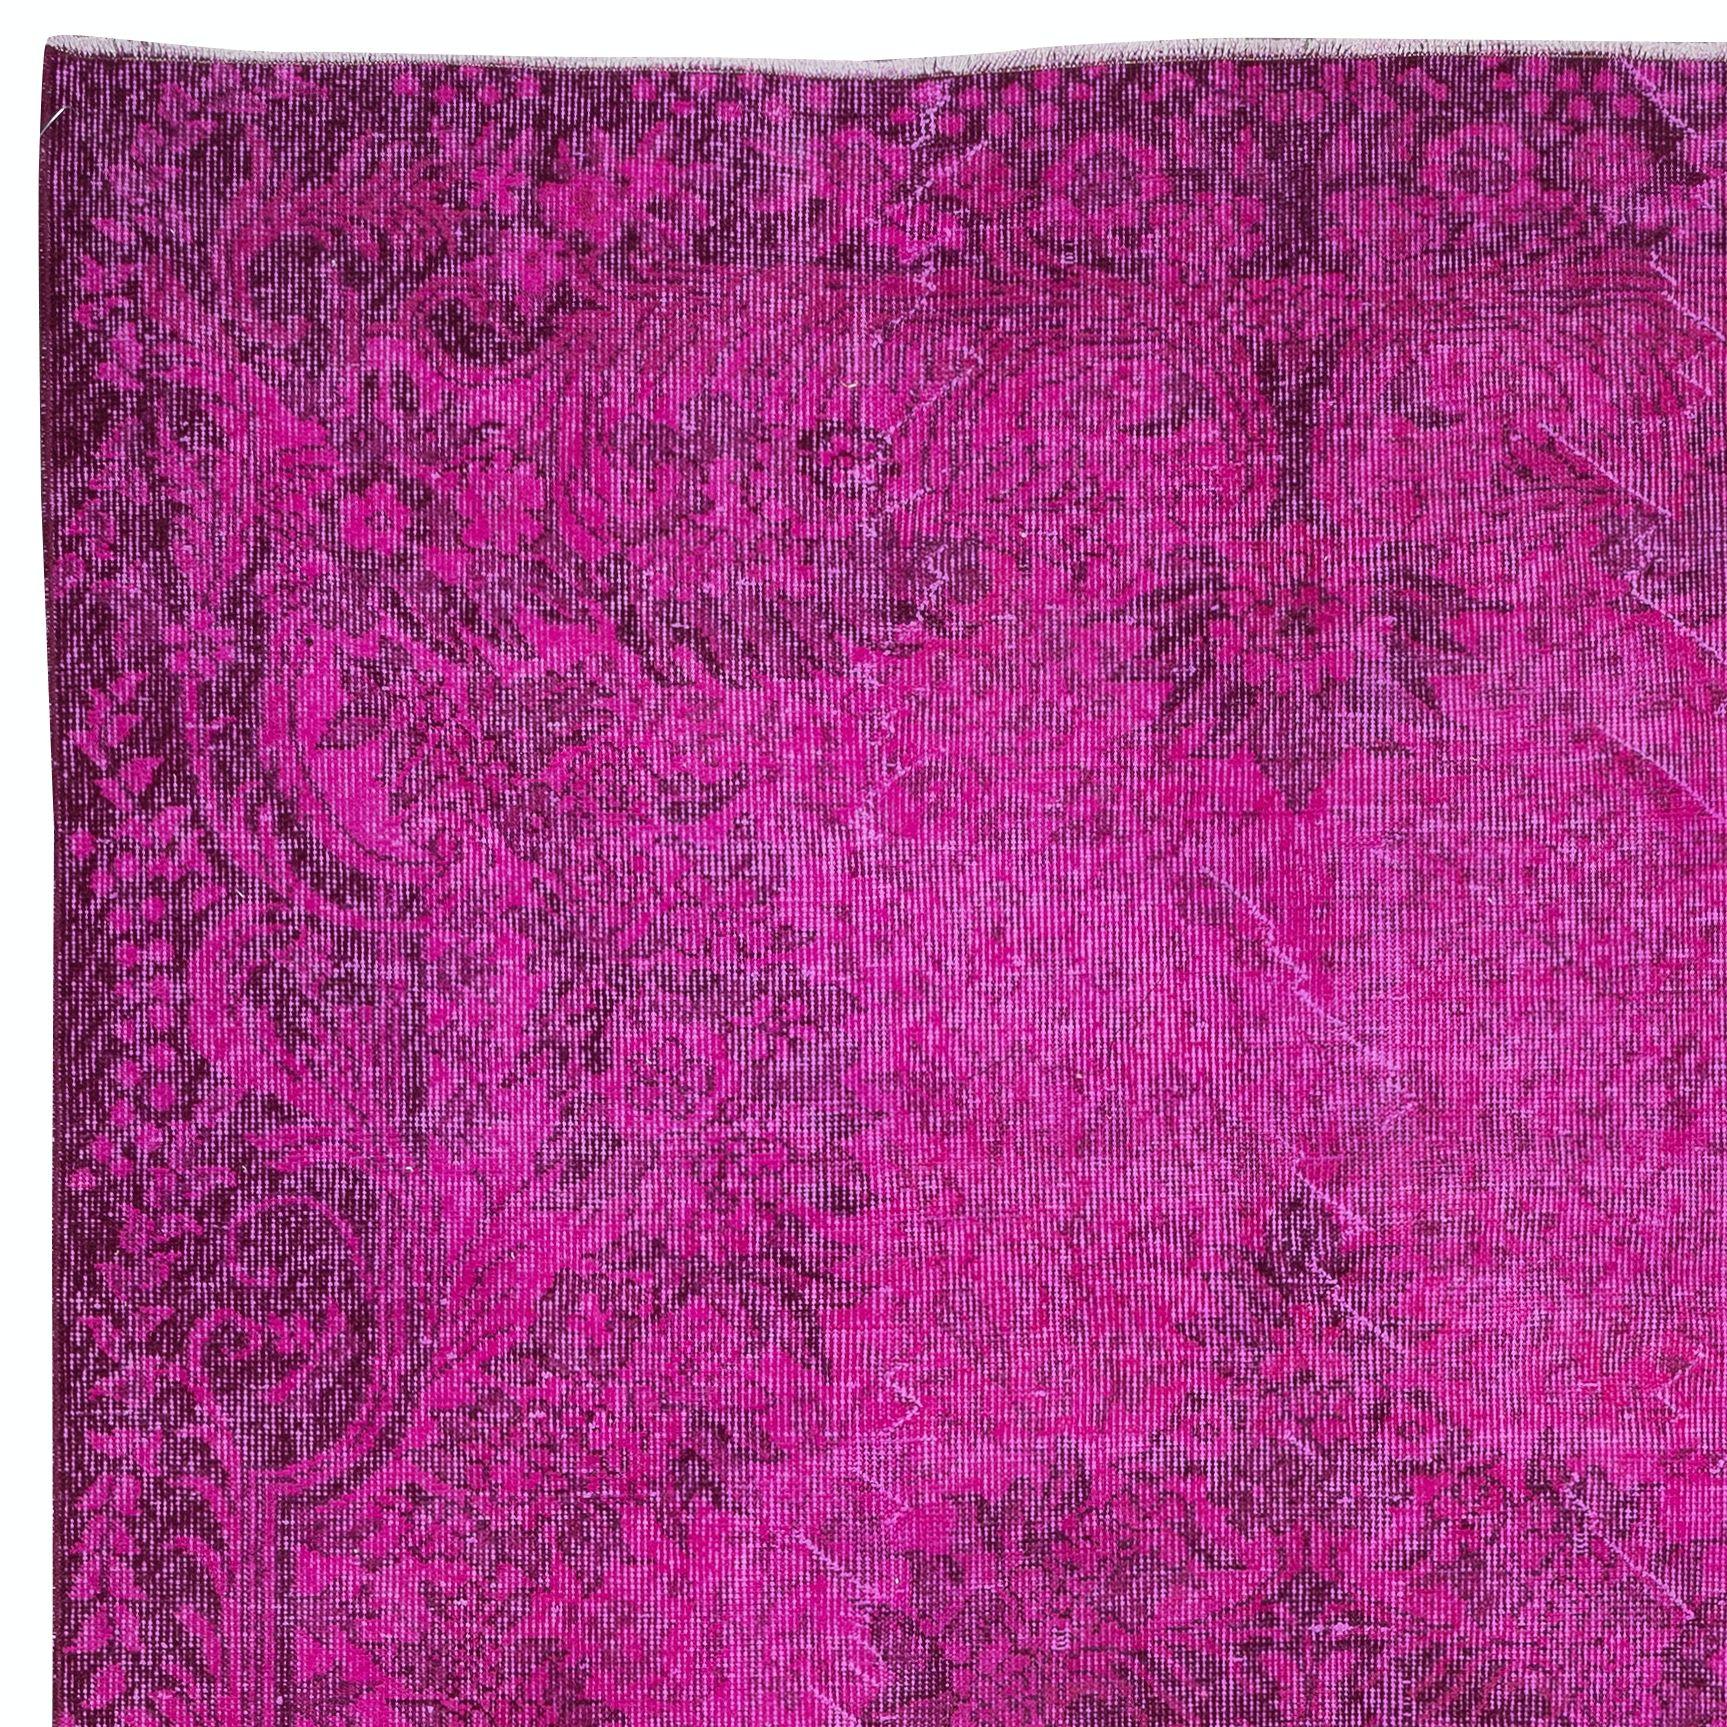 Hand-Woven 5.8x9.6 Ft Pink Area Rug, Handknotted in Turkey, Ideal for Modern Interiors For Sale